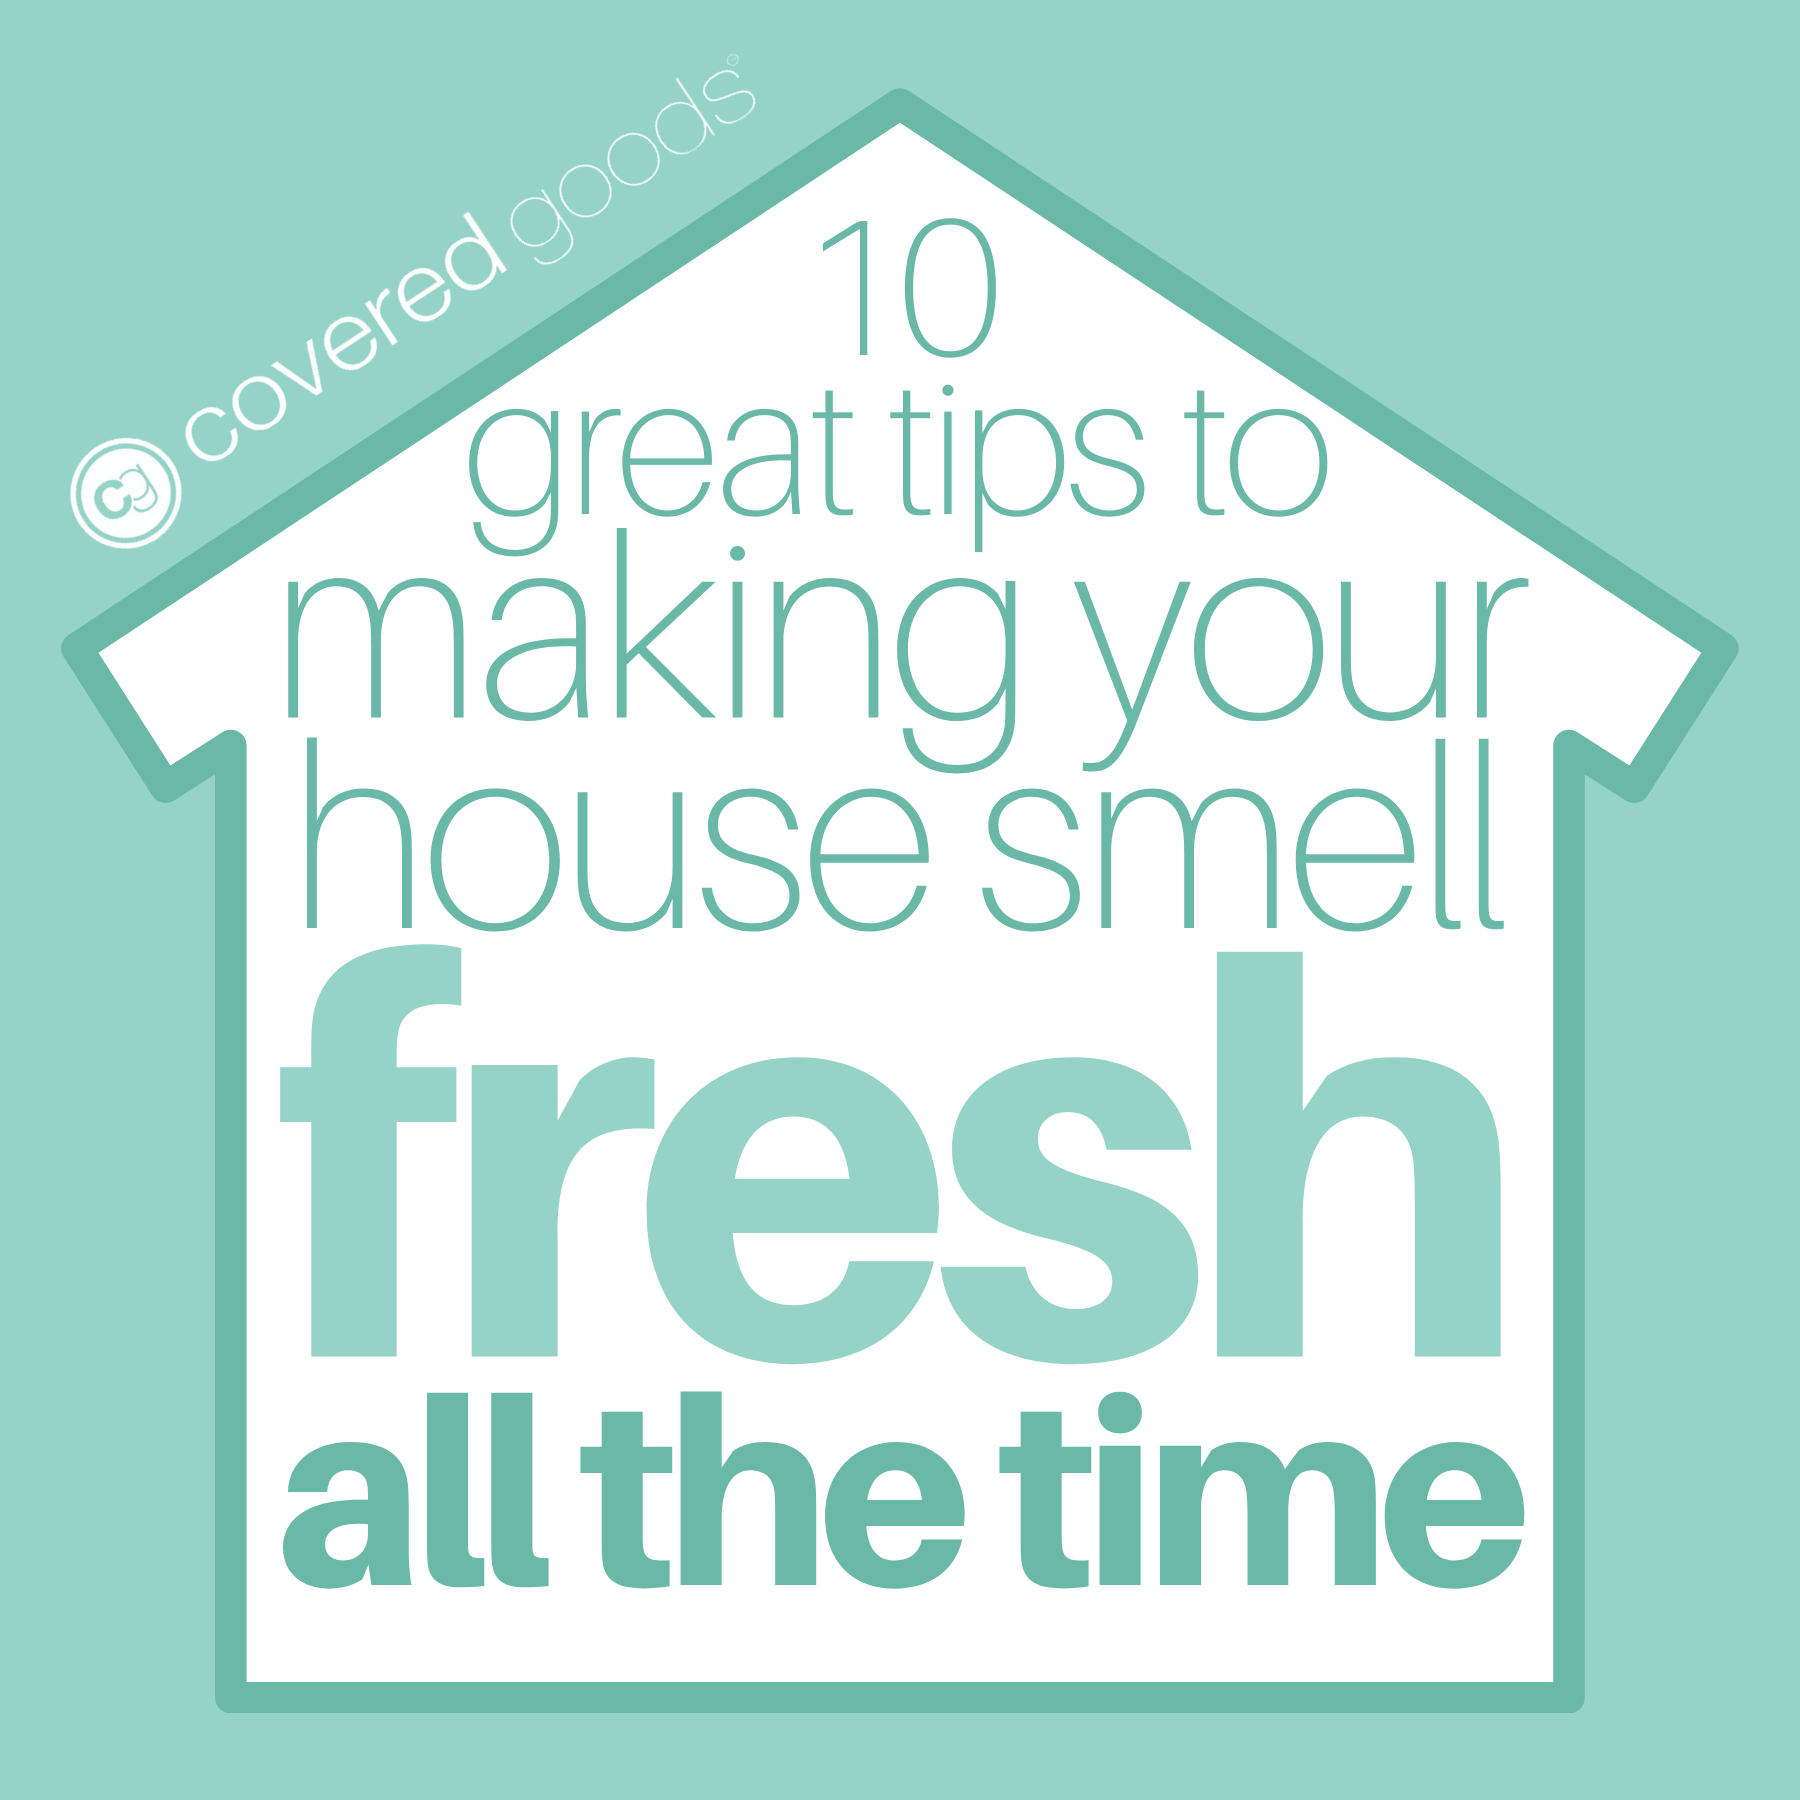 10 Great Tips to Making Your House Smell Fresh All the Time